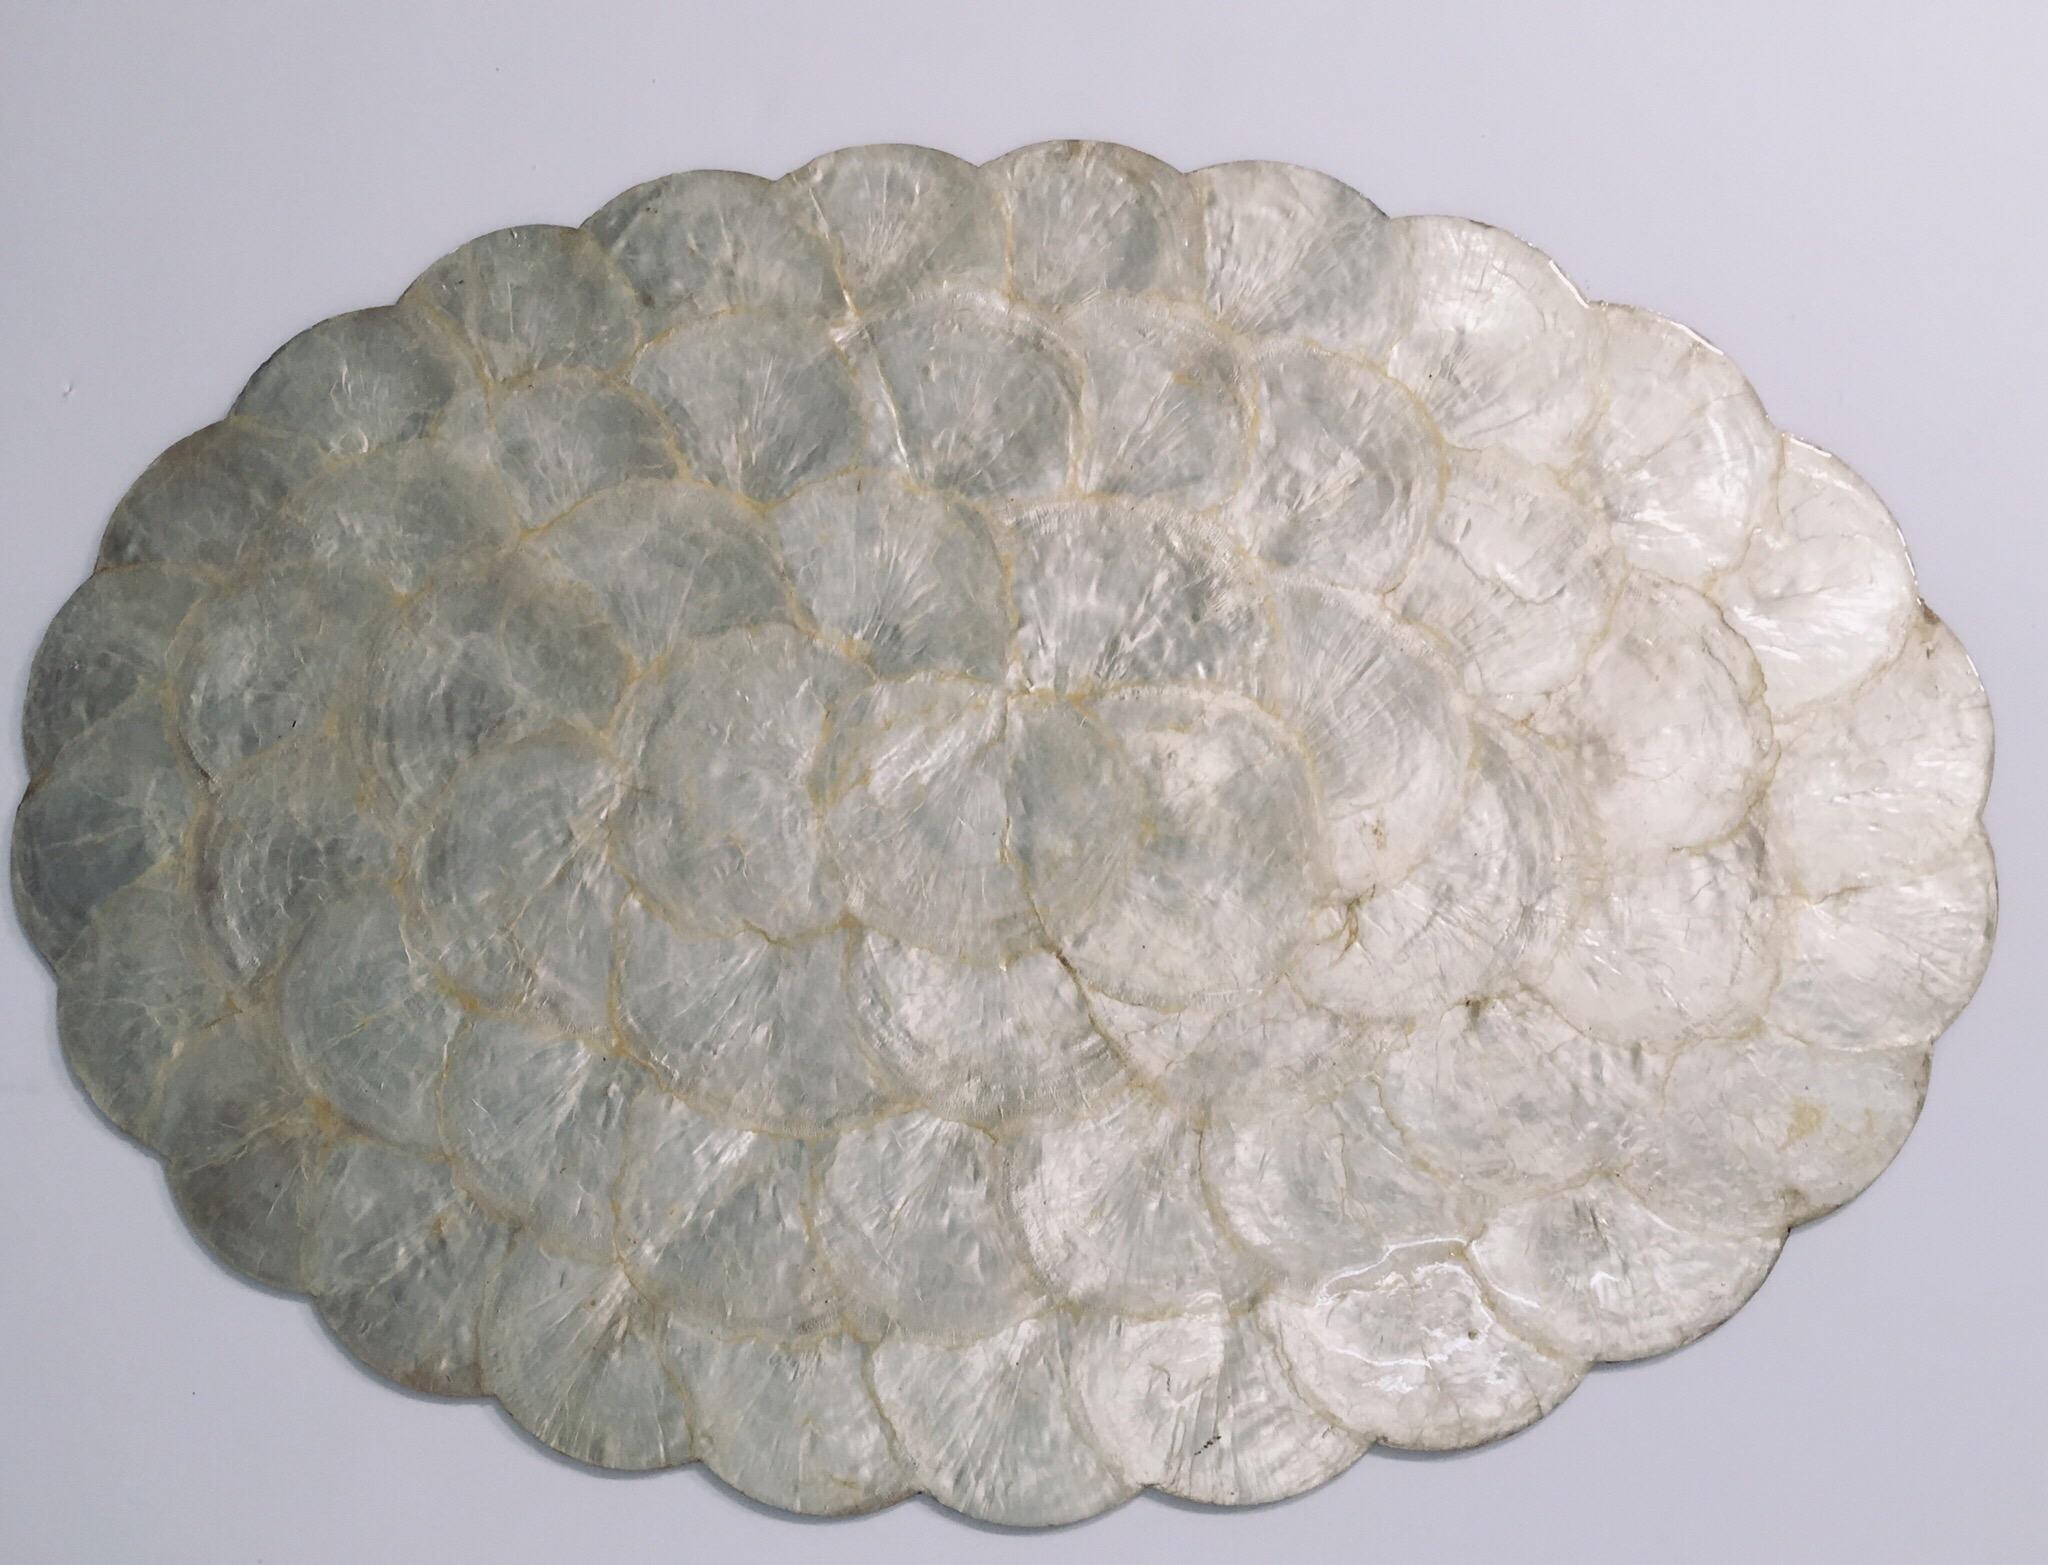 Set of six capiz pearl shell scalloped edge oval placemats
Luminous, beautiful pearl shell color.
The reverse of these placemats is cork. 
These would make a beautiful, tropical and elegant table setting. 
Late 1970s or early 1980s. Made in the